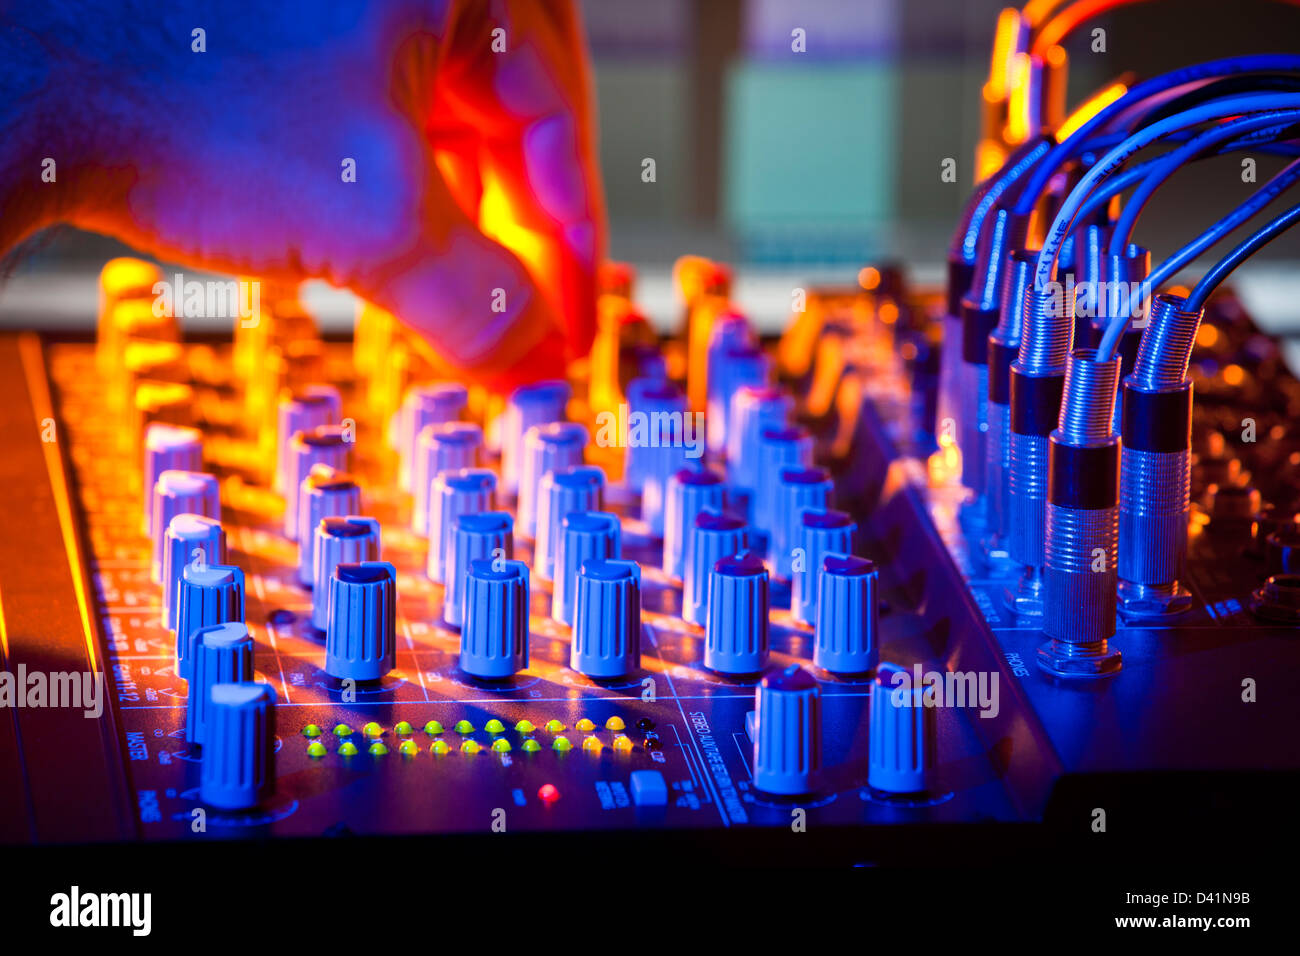 Close-up of audio mixing desk. Motion blurred hand on distant controls. Selective focus on foreground LEDs. Stock Photo